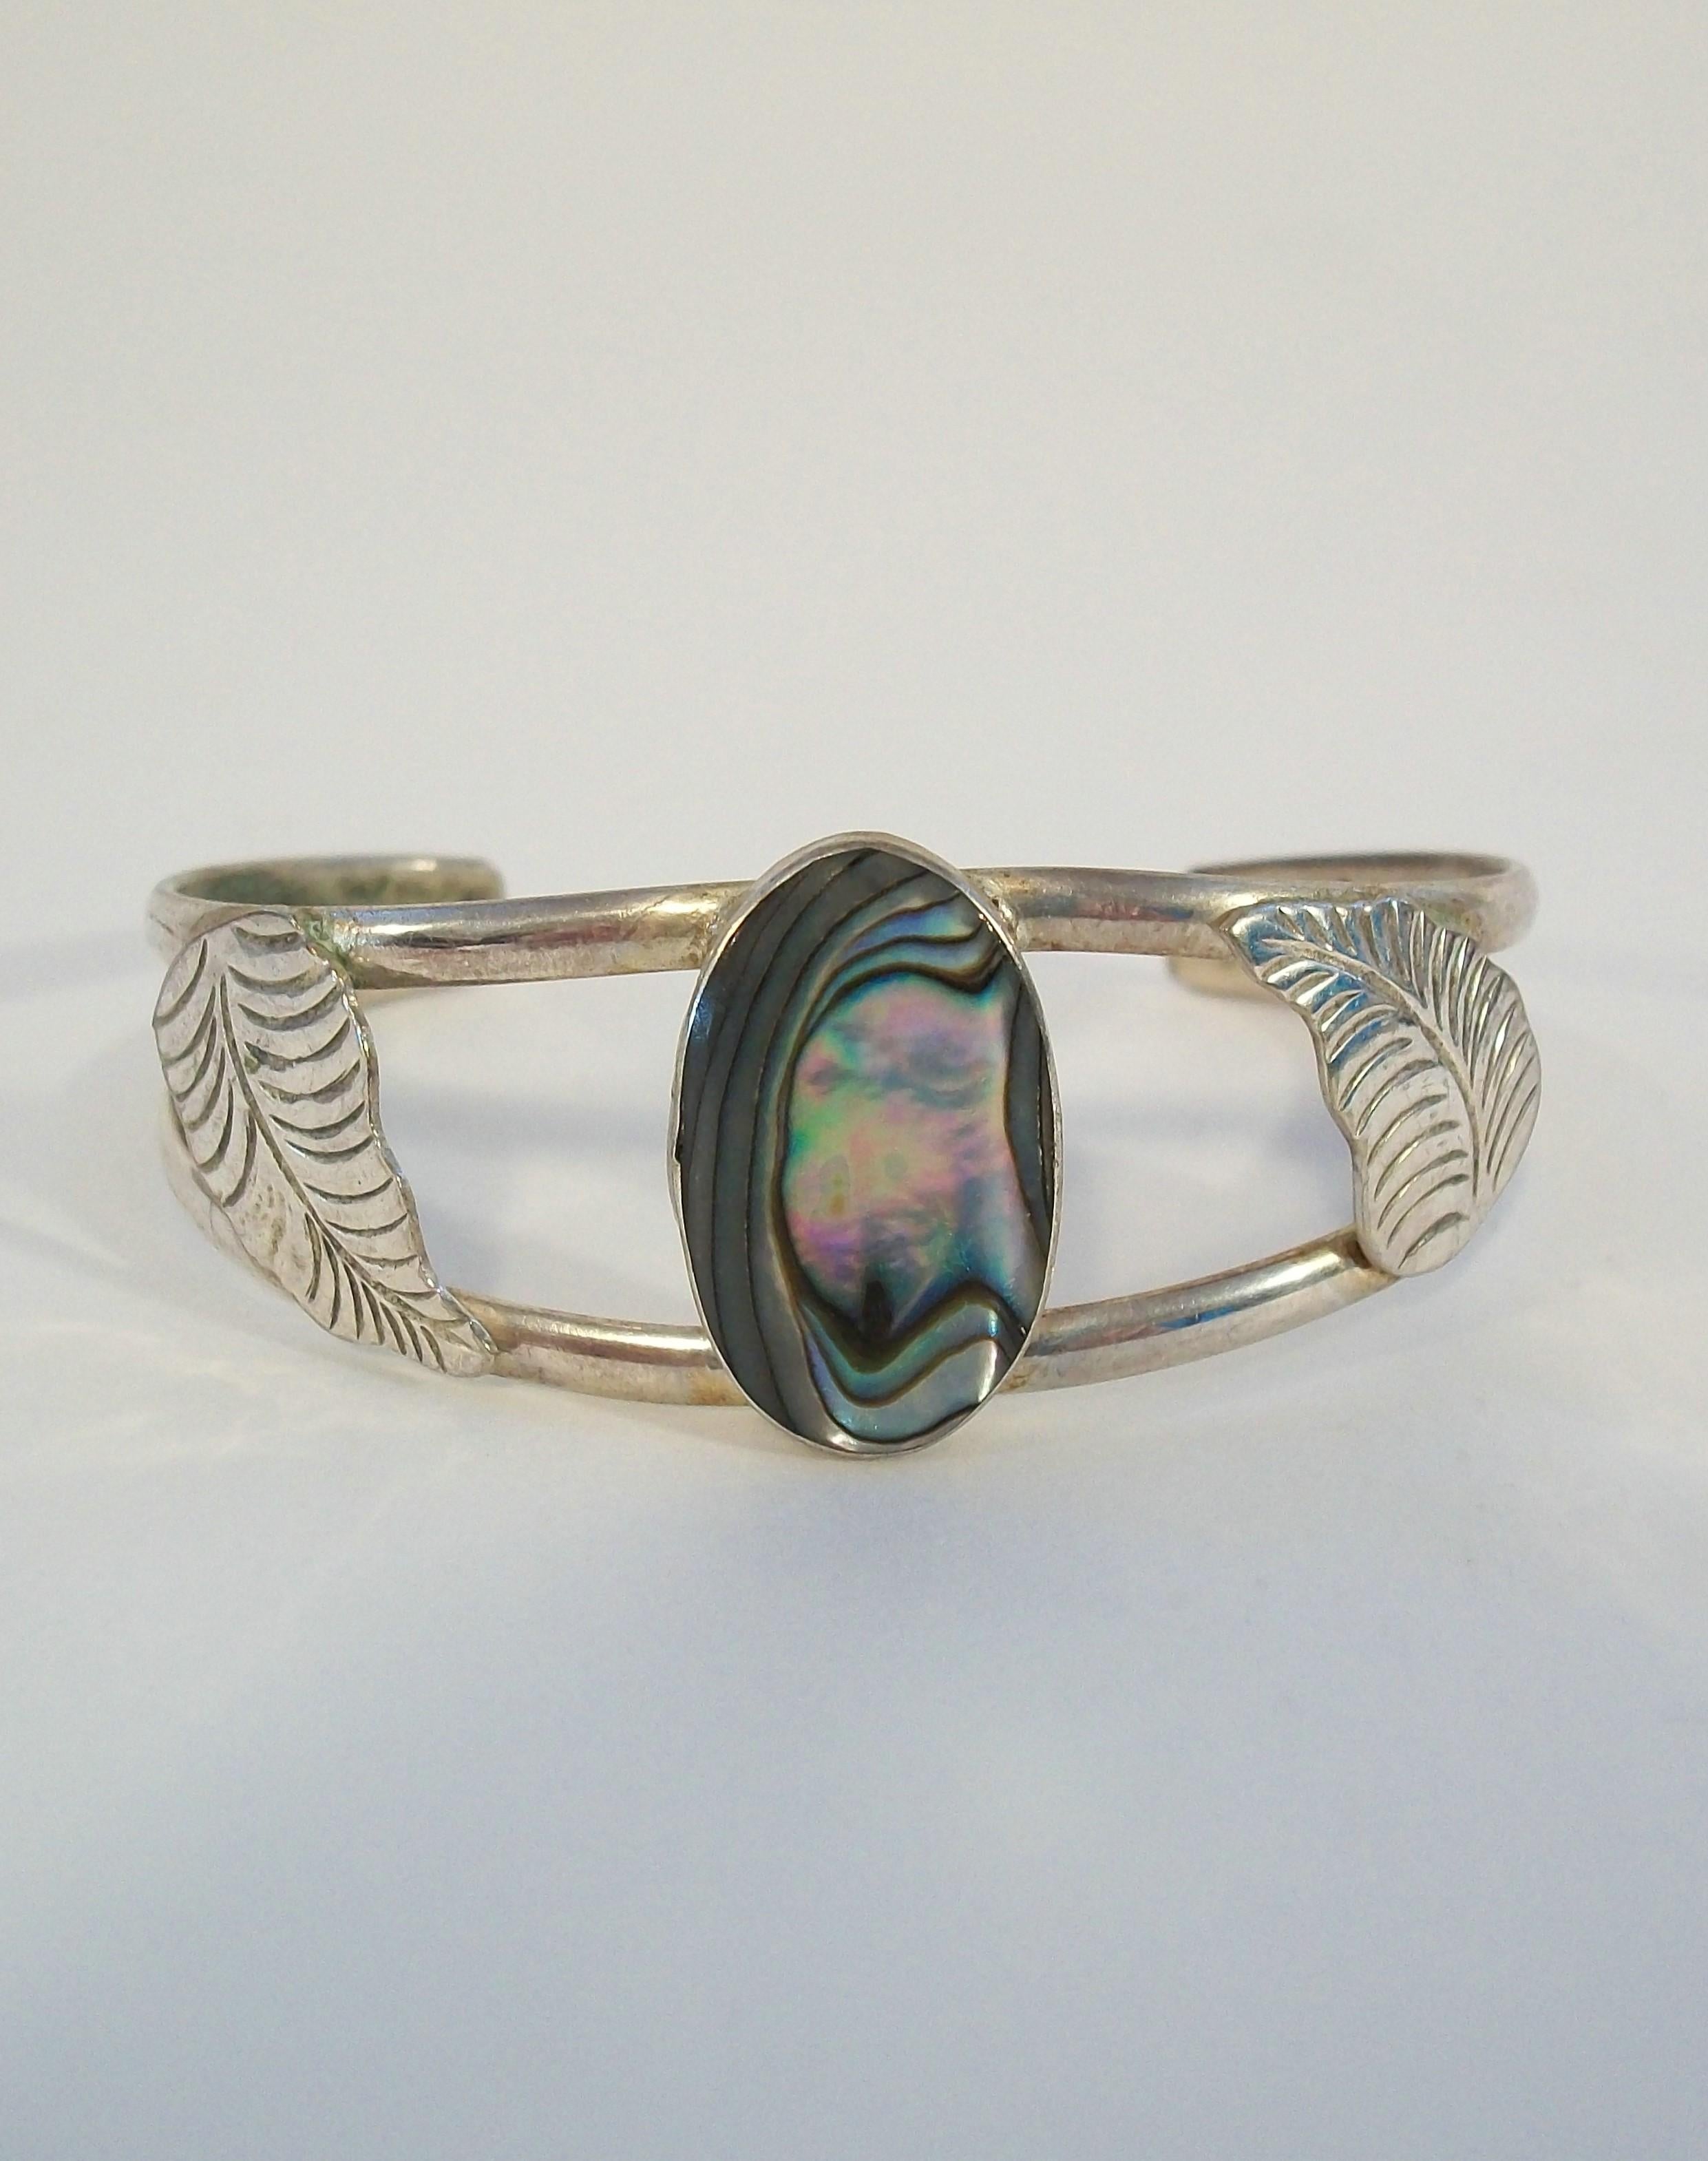 Vintage Alpaca silver (nickel silver) cuff bracelet - featuring a bezel set abalone shell in the center with articulated leaves to either side - signed - Mexico - mid 20th century.

Excellent vintage condition - no loss - no damage - no repairs -